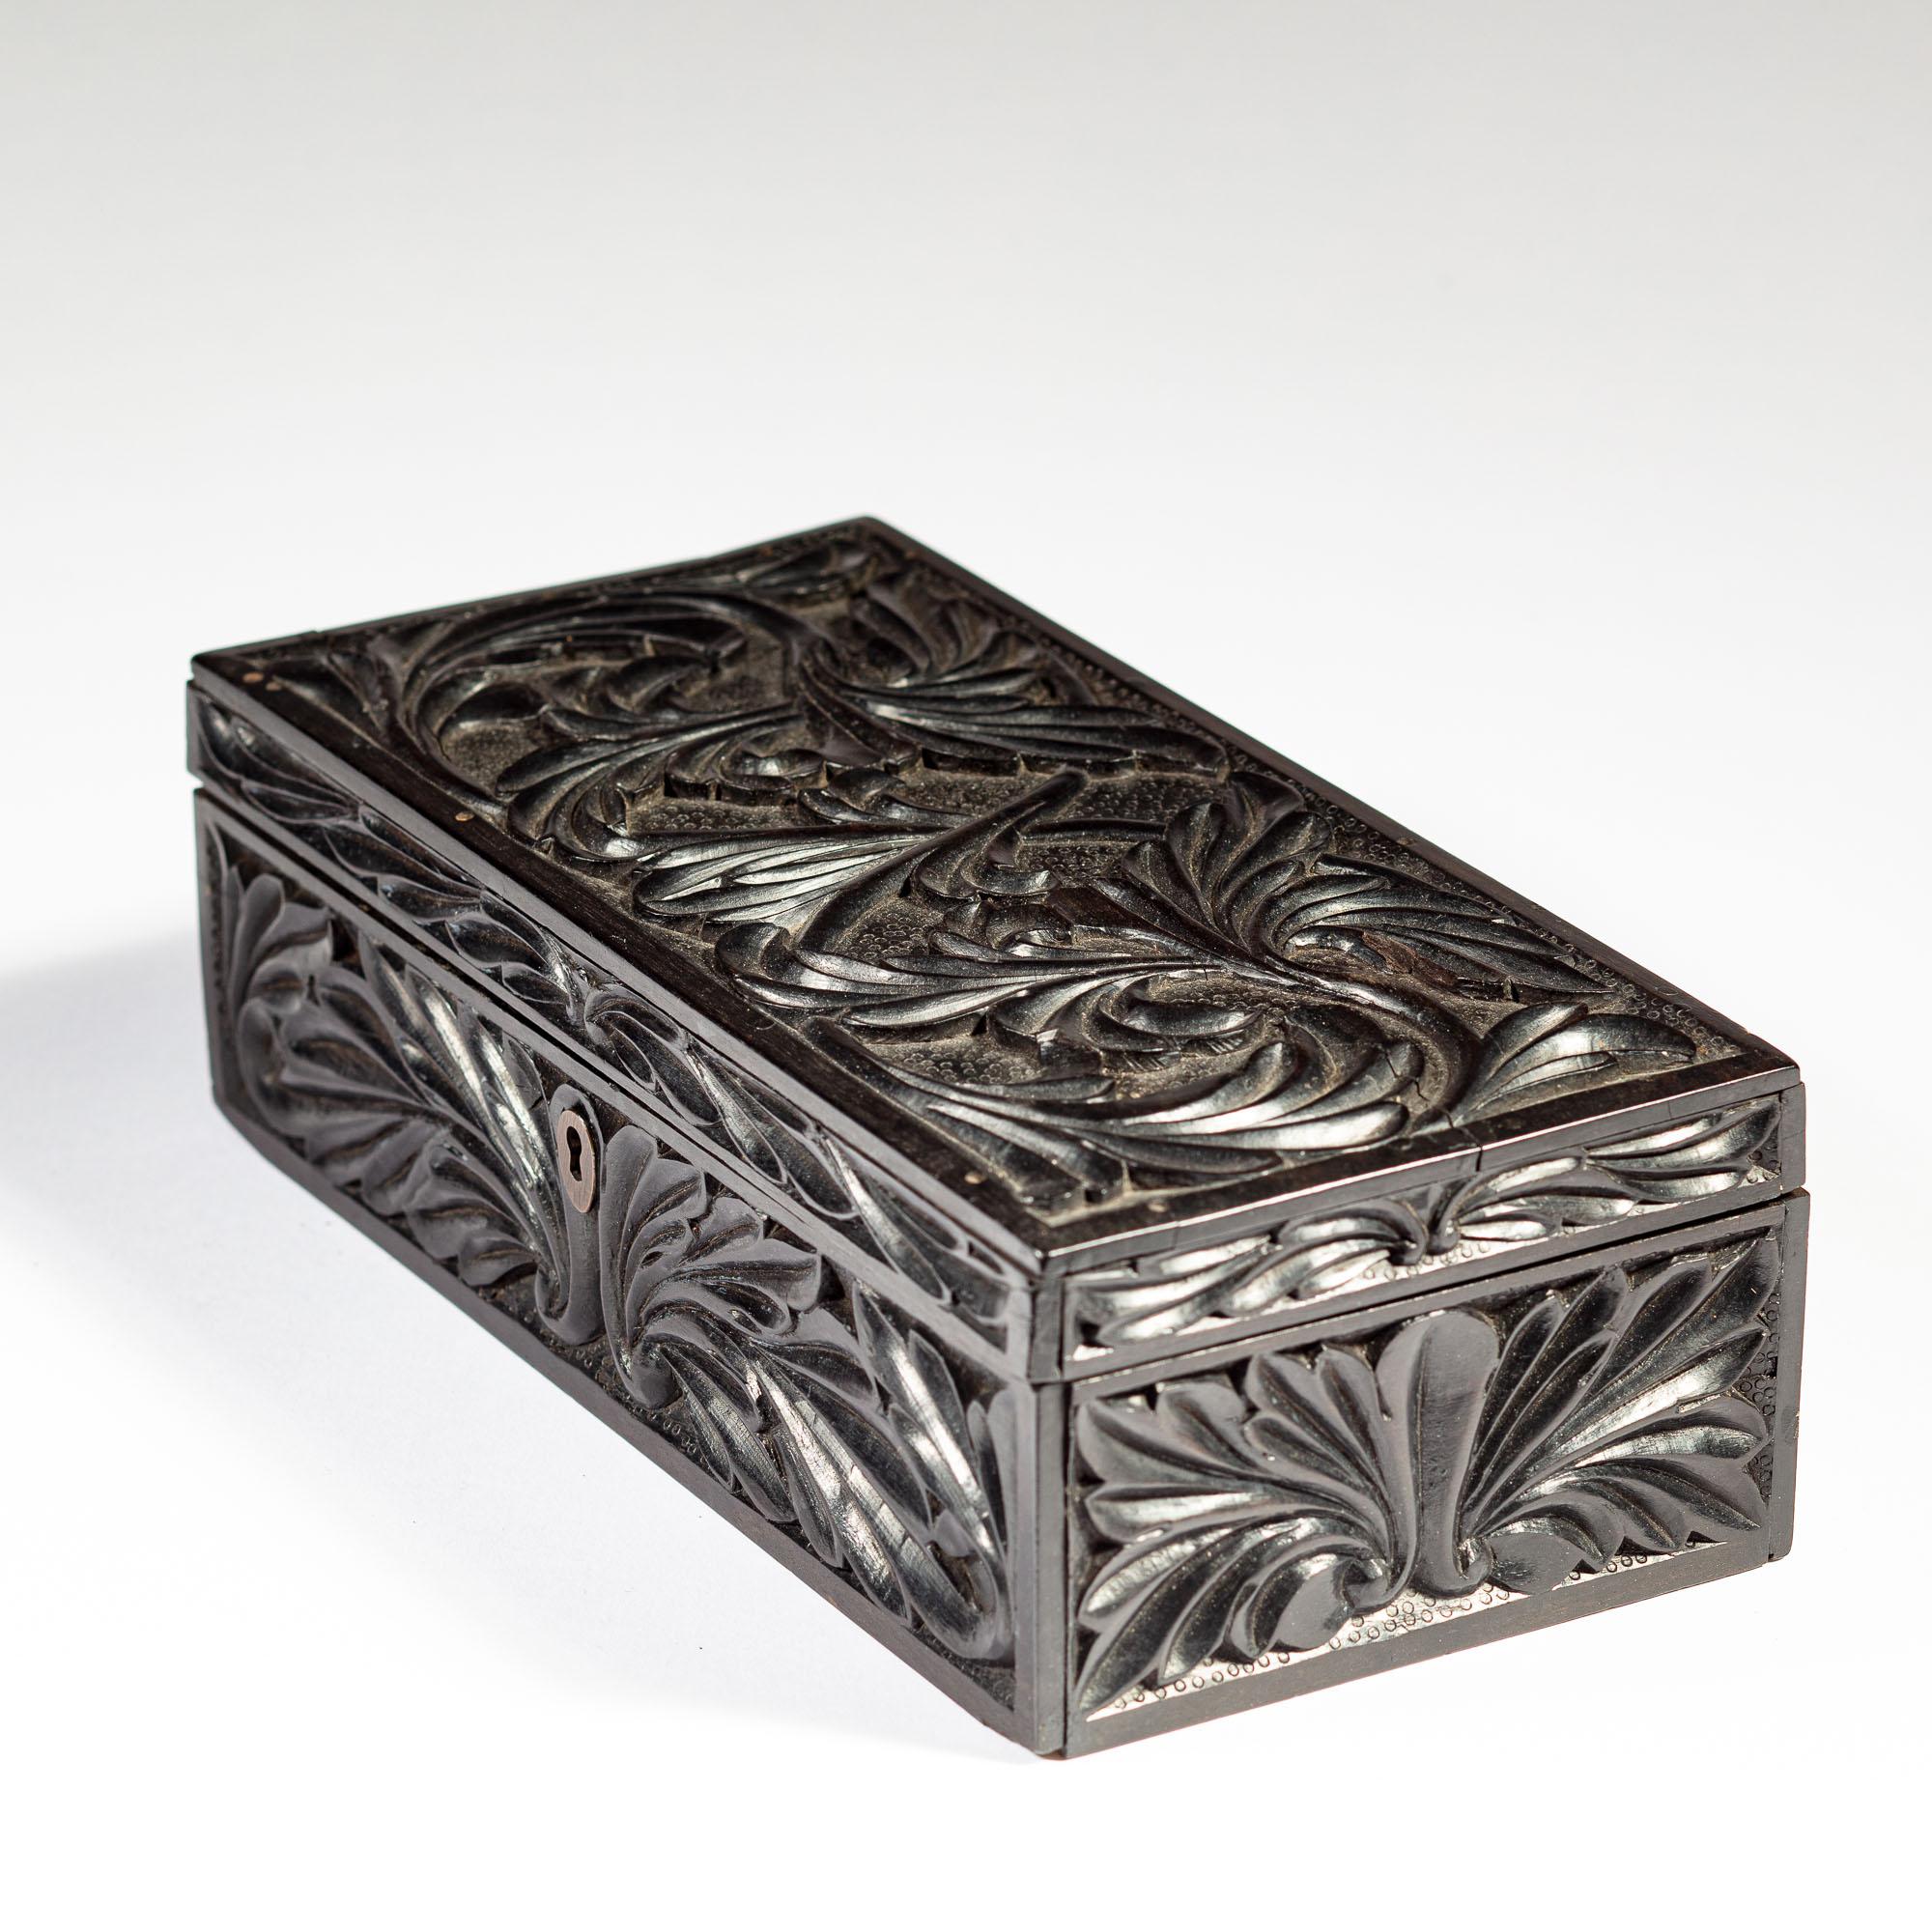 A charming mid 19th century carved ebony box with intertwined foliate ornament on all sides on a punched ground, opening to a void interior, the sides and lid with inlaid bone dots and an elephant wearing a red cloth above the name GALLE – A town in